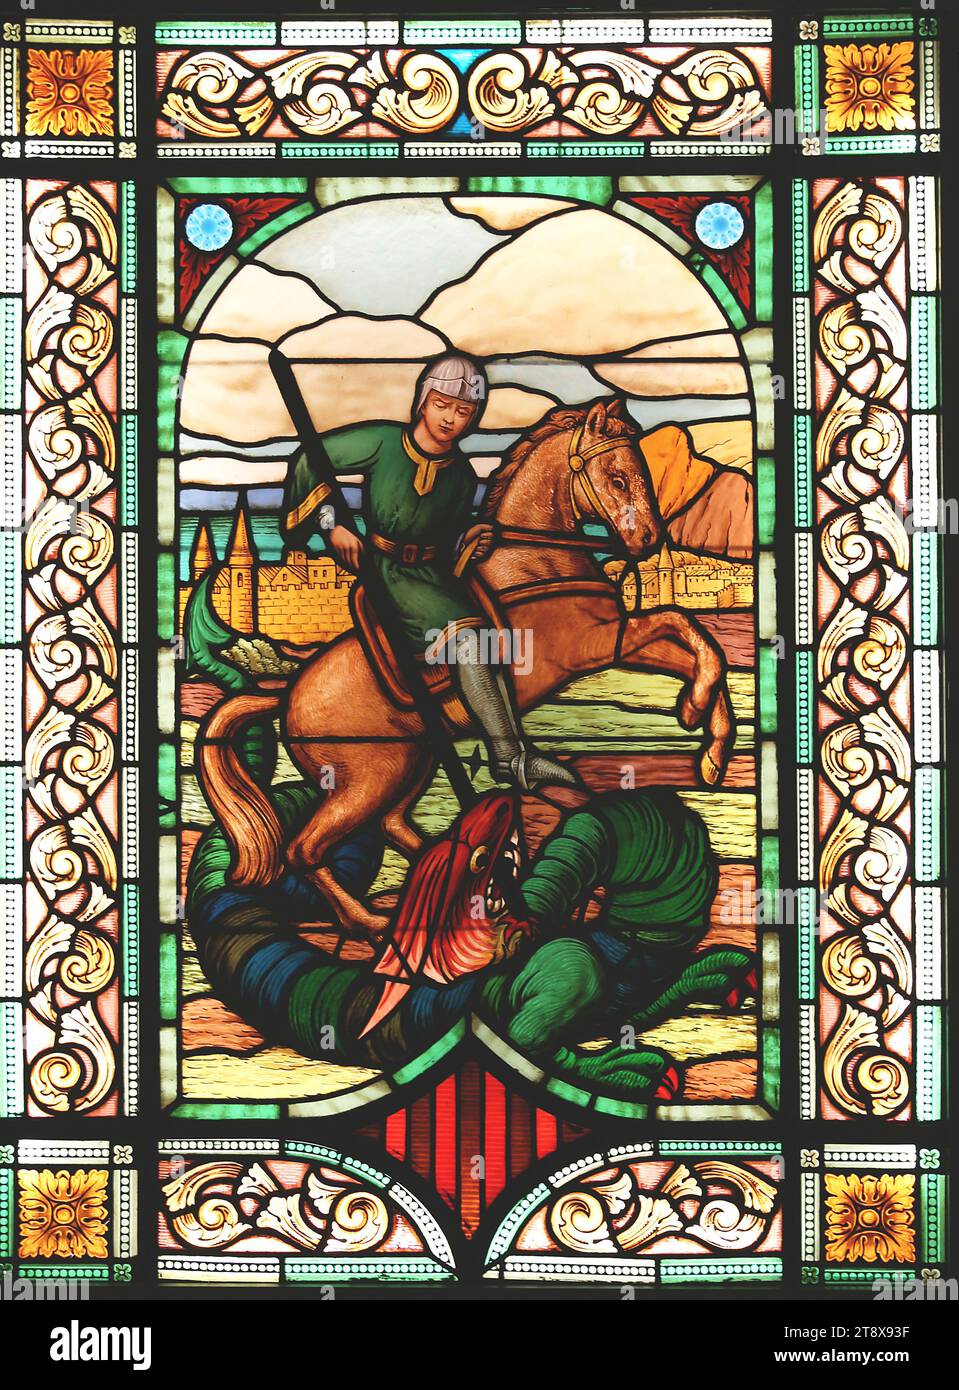 Saint George killing the dragon. Stained and painting glass (C.1914) by Antoni Rigalt i Blanch (1850-1914) Modernism Museum of Barcelona. Stock Photo